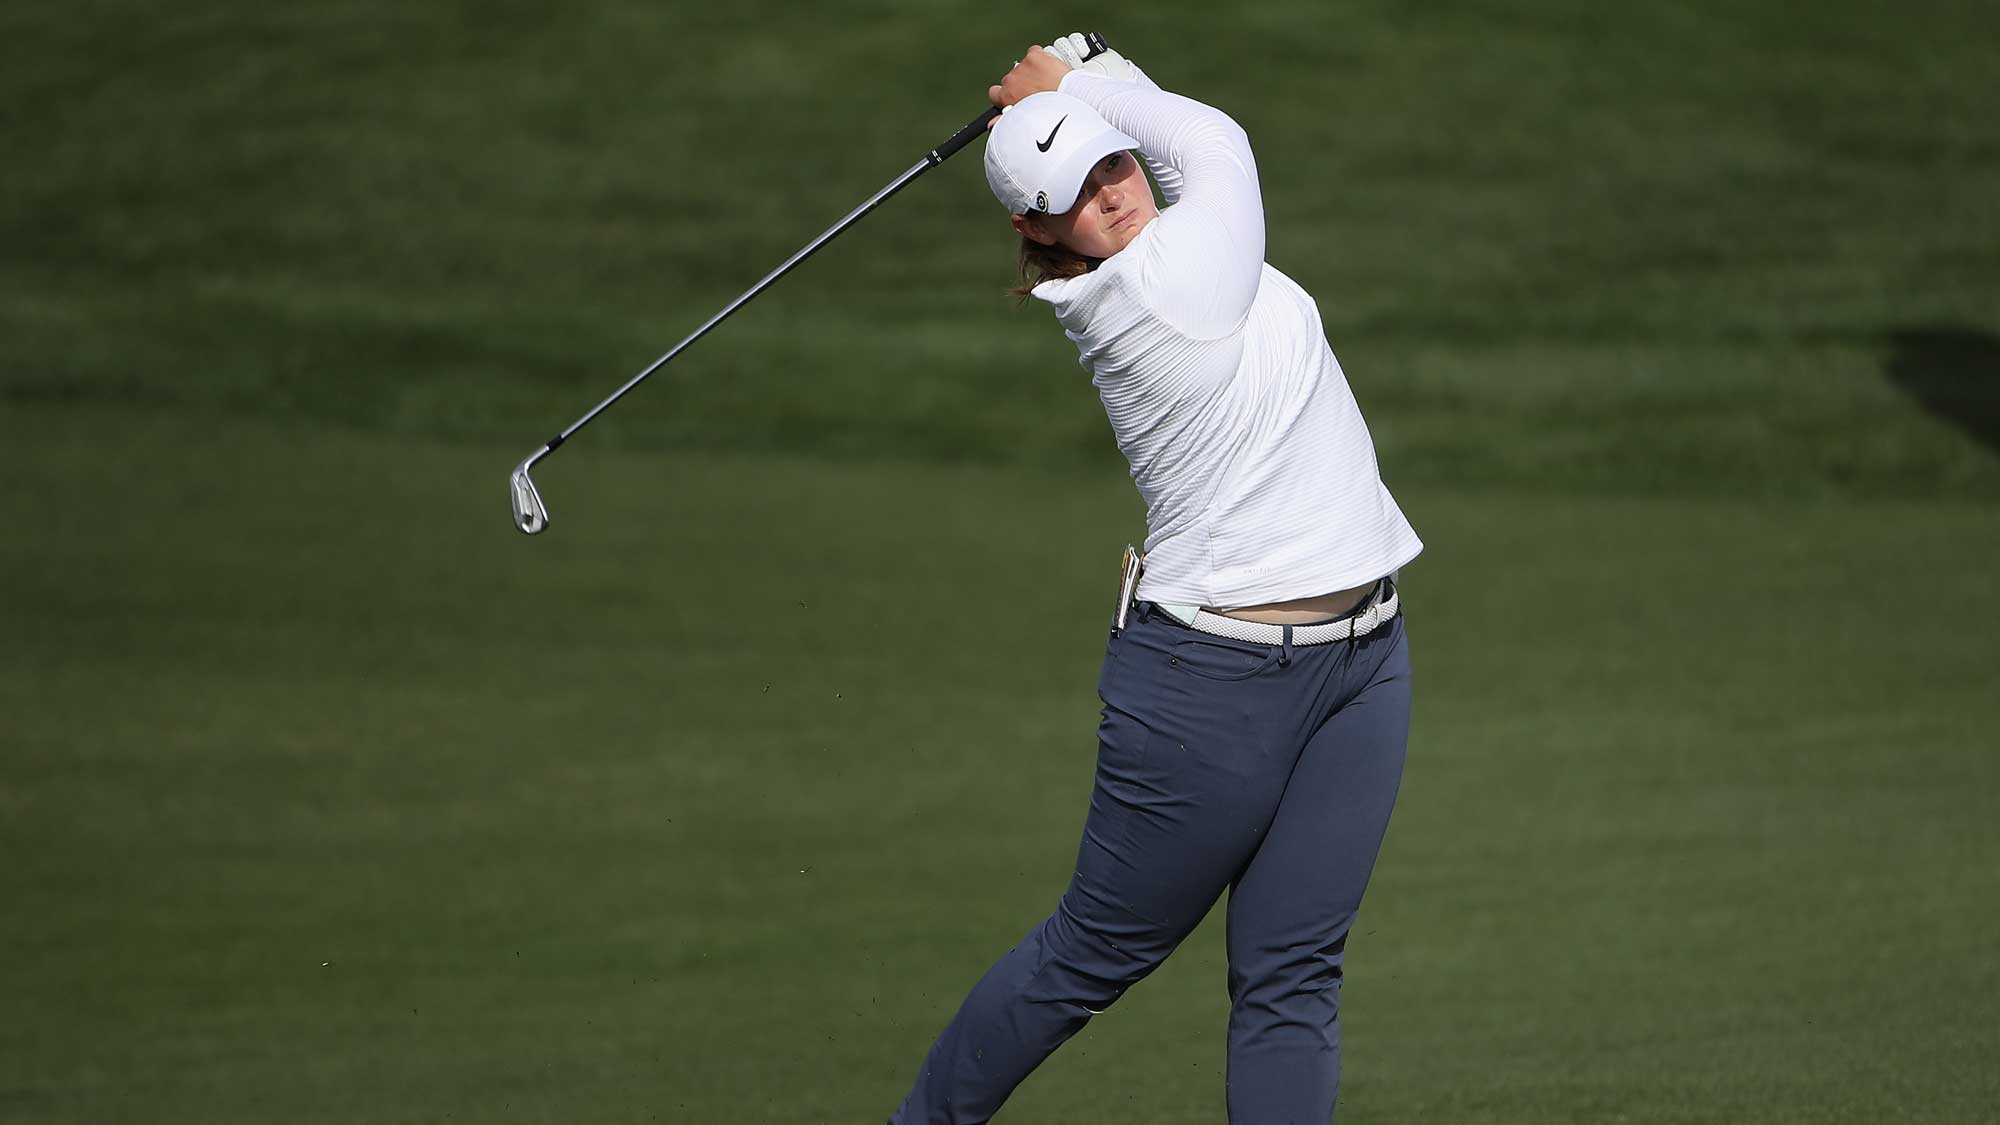 Caroline Inglis Moves into Contention at Founders Cup